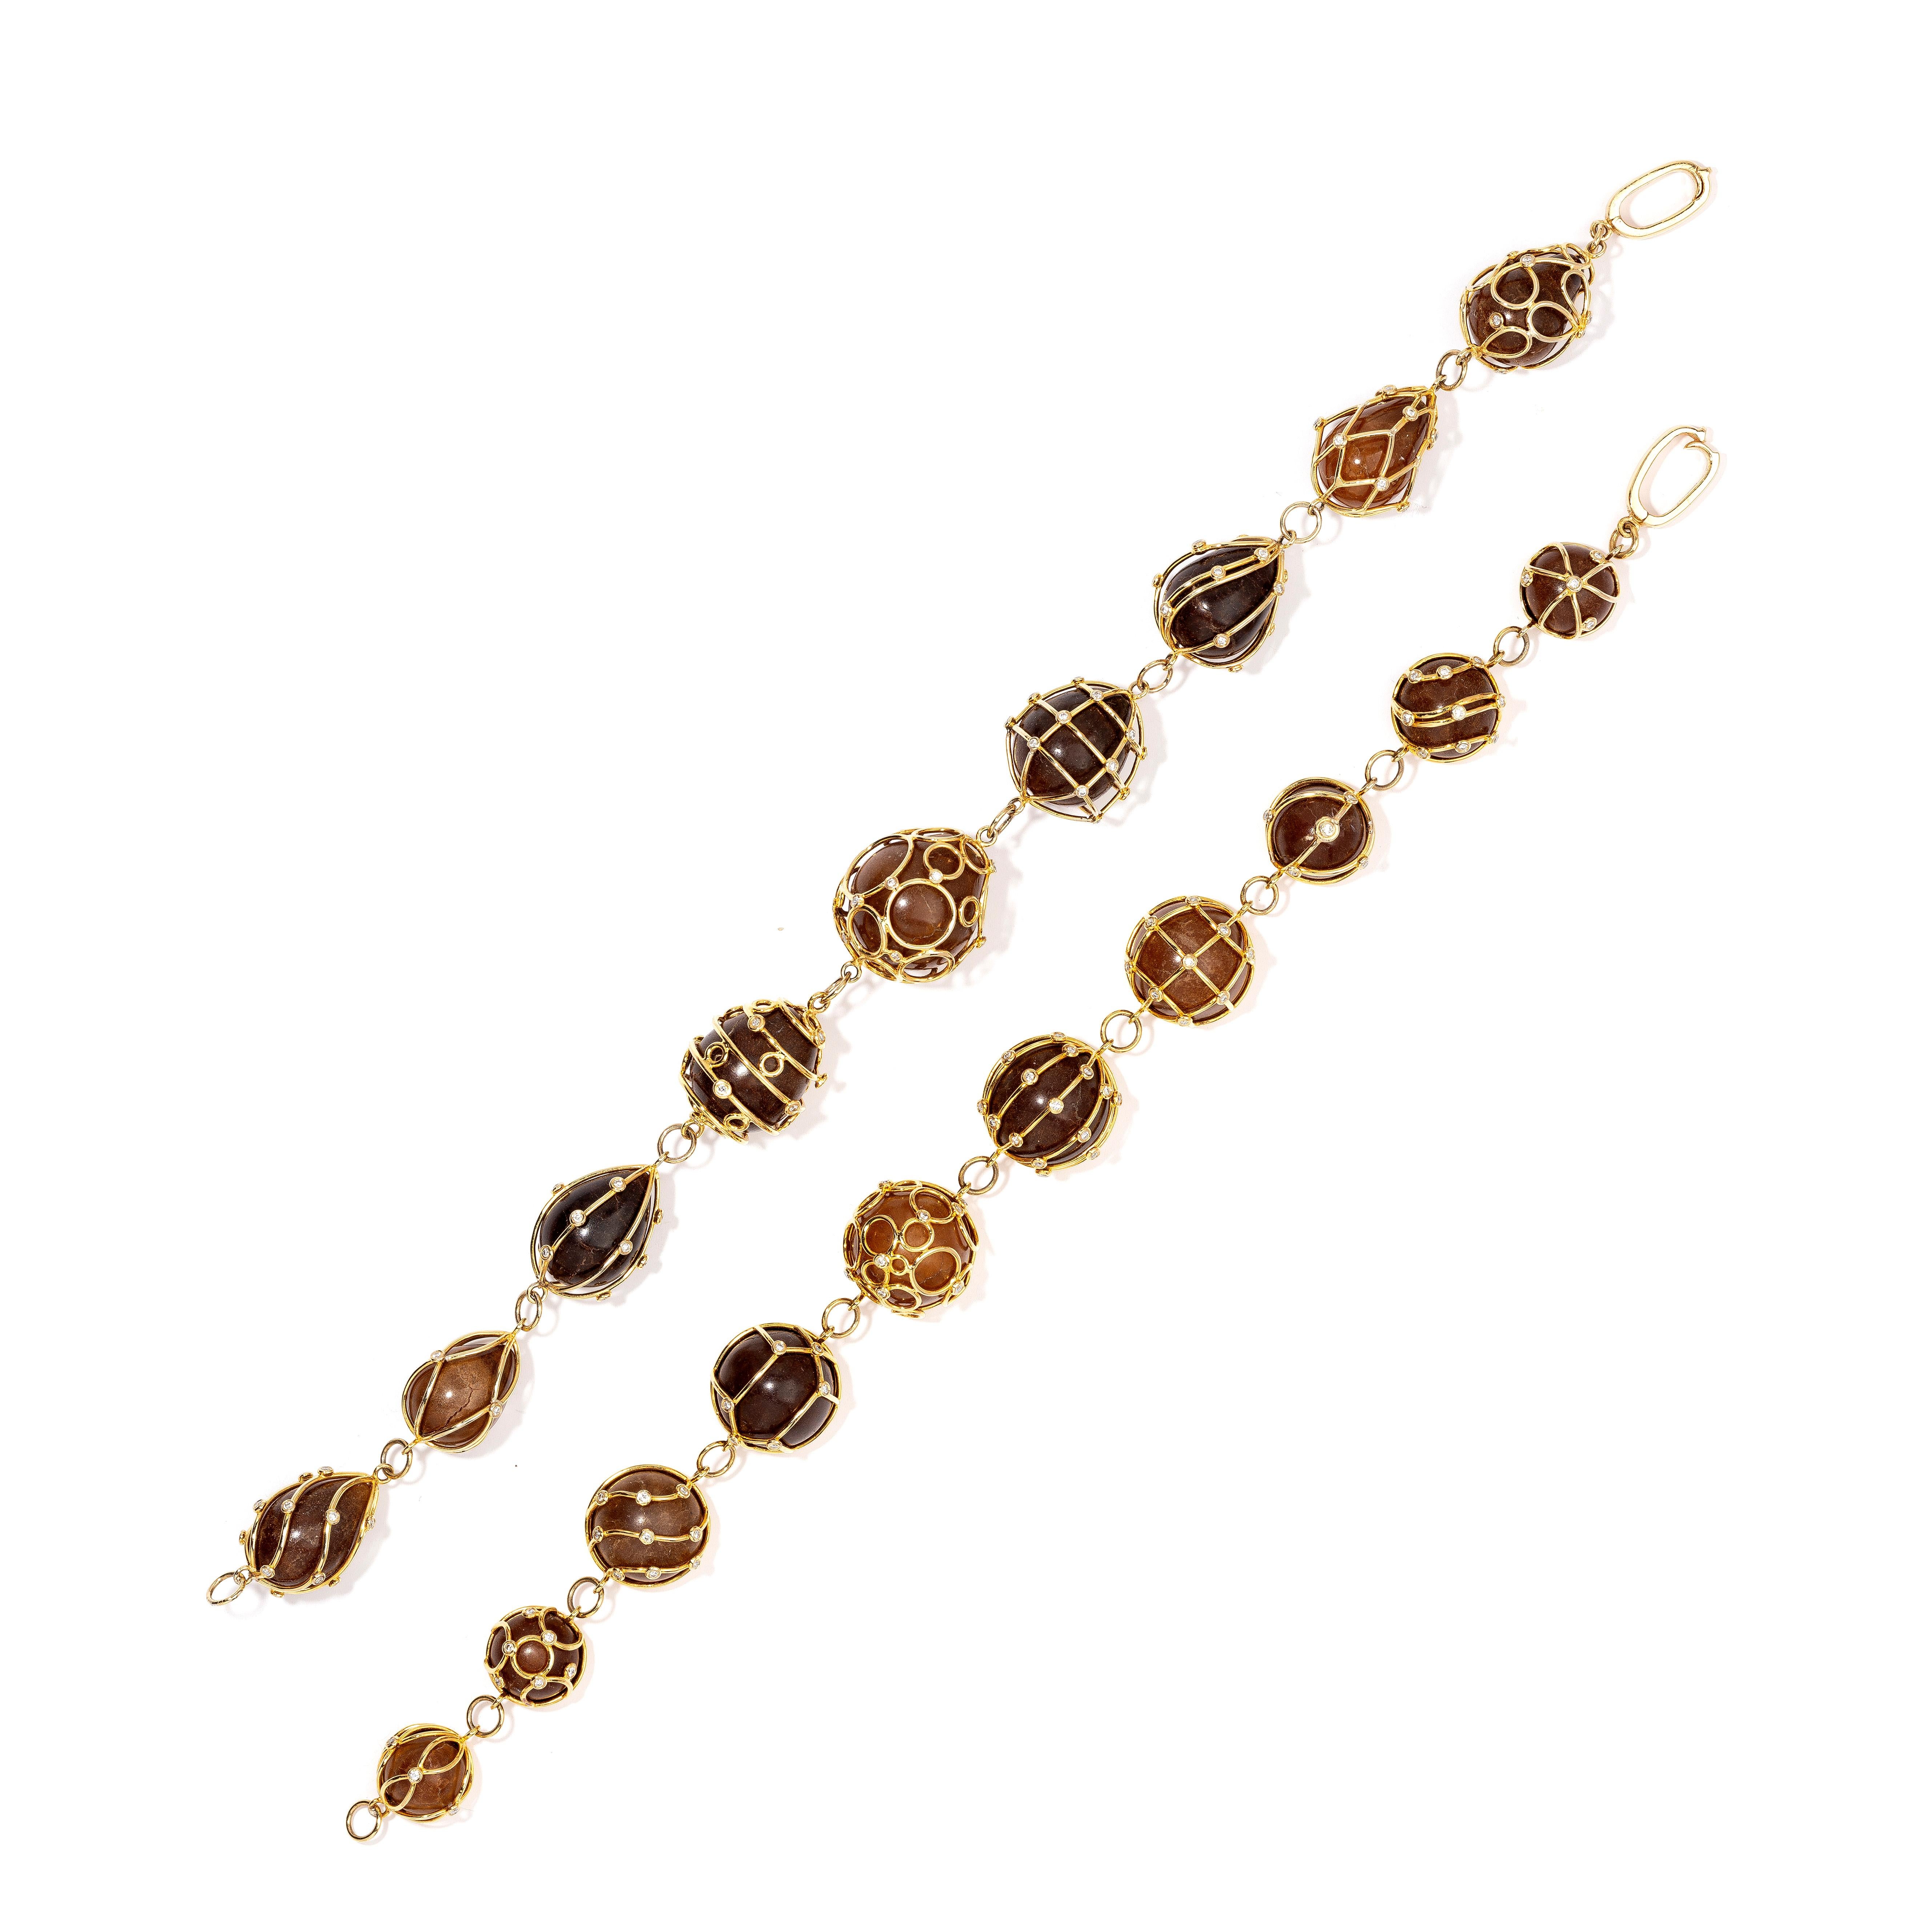 One pair of bracelets made in 18k gold and set with 19 loose brown and black Natural Saltwater button shaped Pearls
Certified by GGTL certififcate 